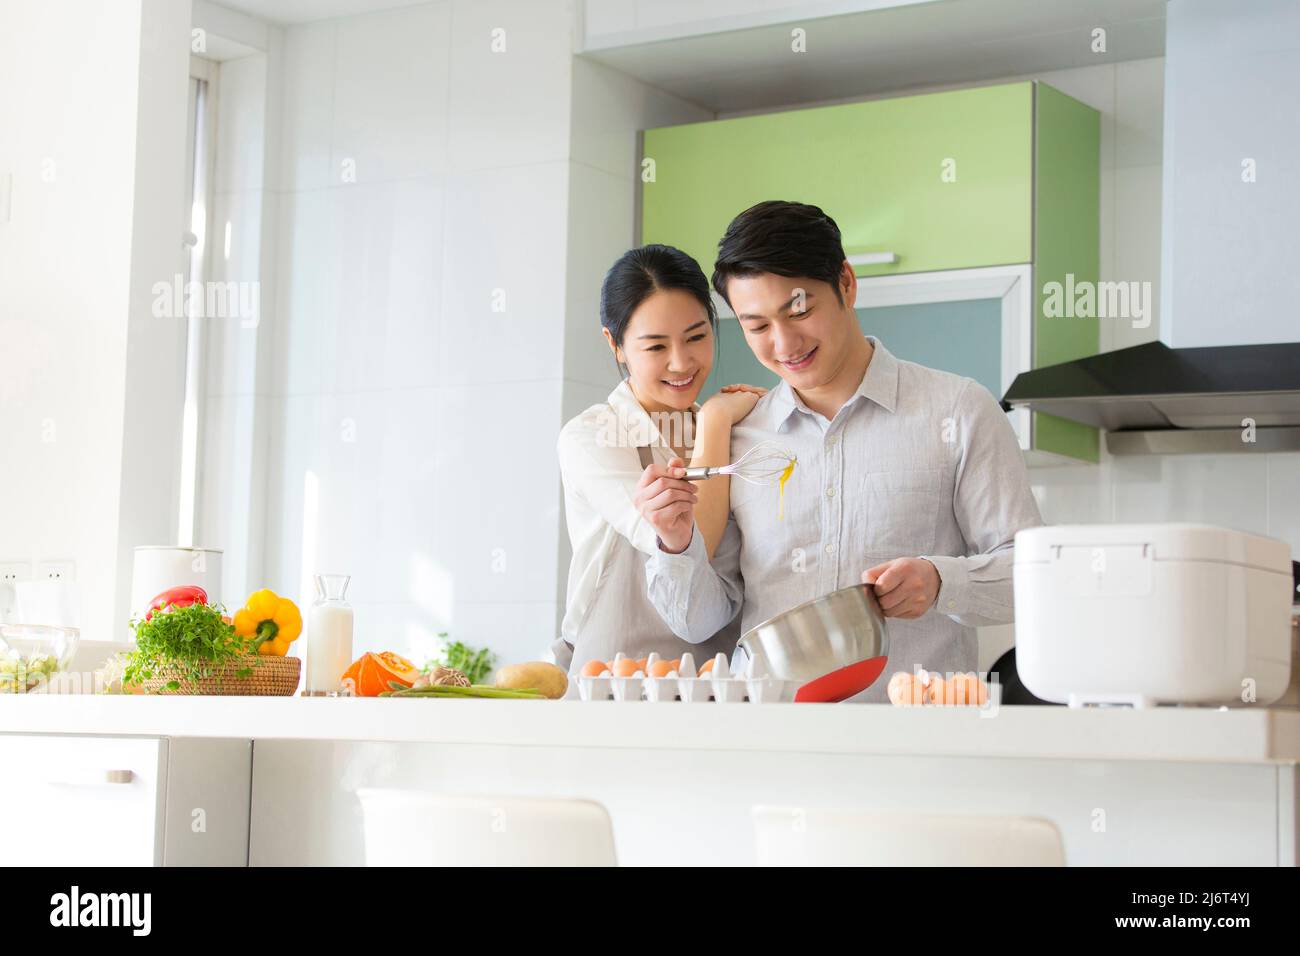 Young couple preparing food in the family kitchen - stock photo Stock Photo